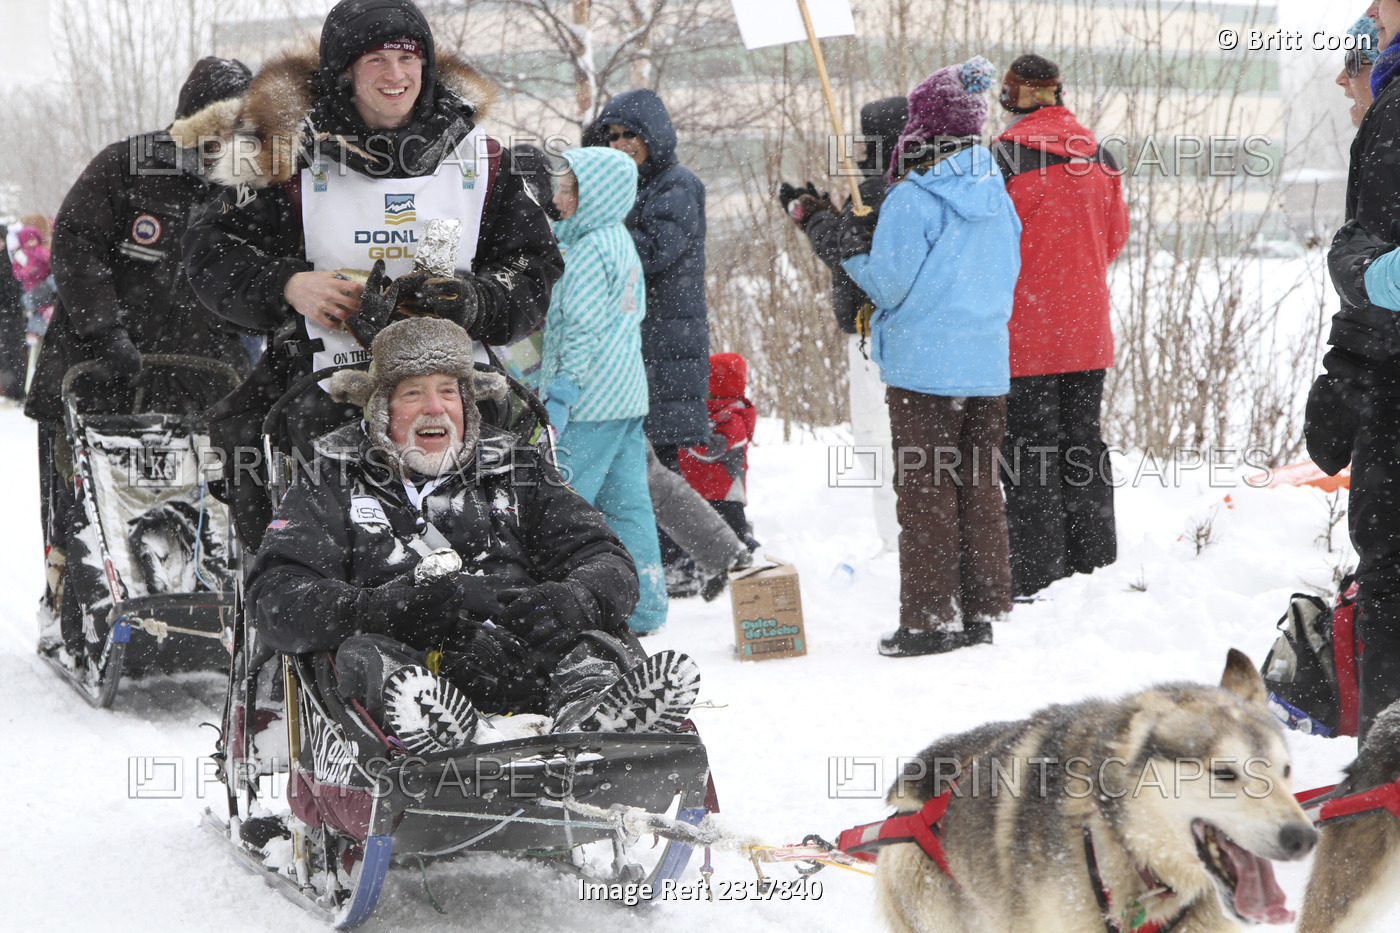 Dallas Seavey Mushes Through A Ski Trail Lined With Spectators In Midtown ...